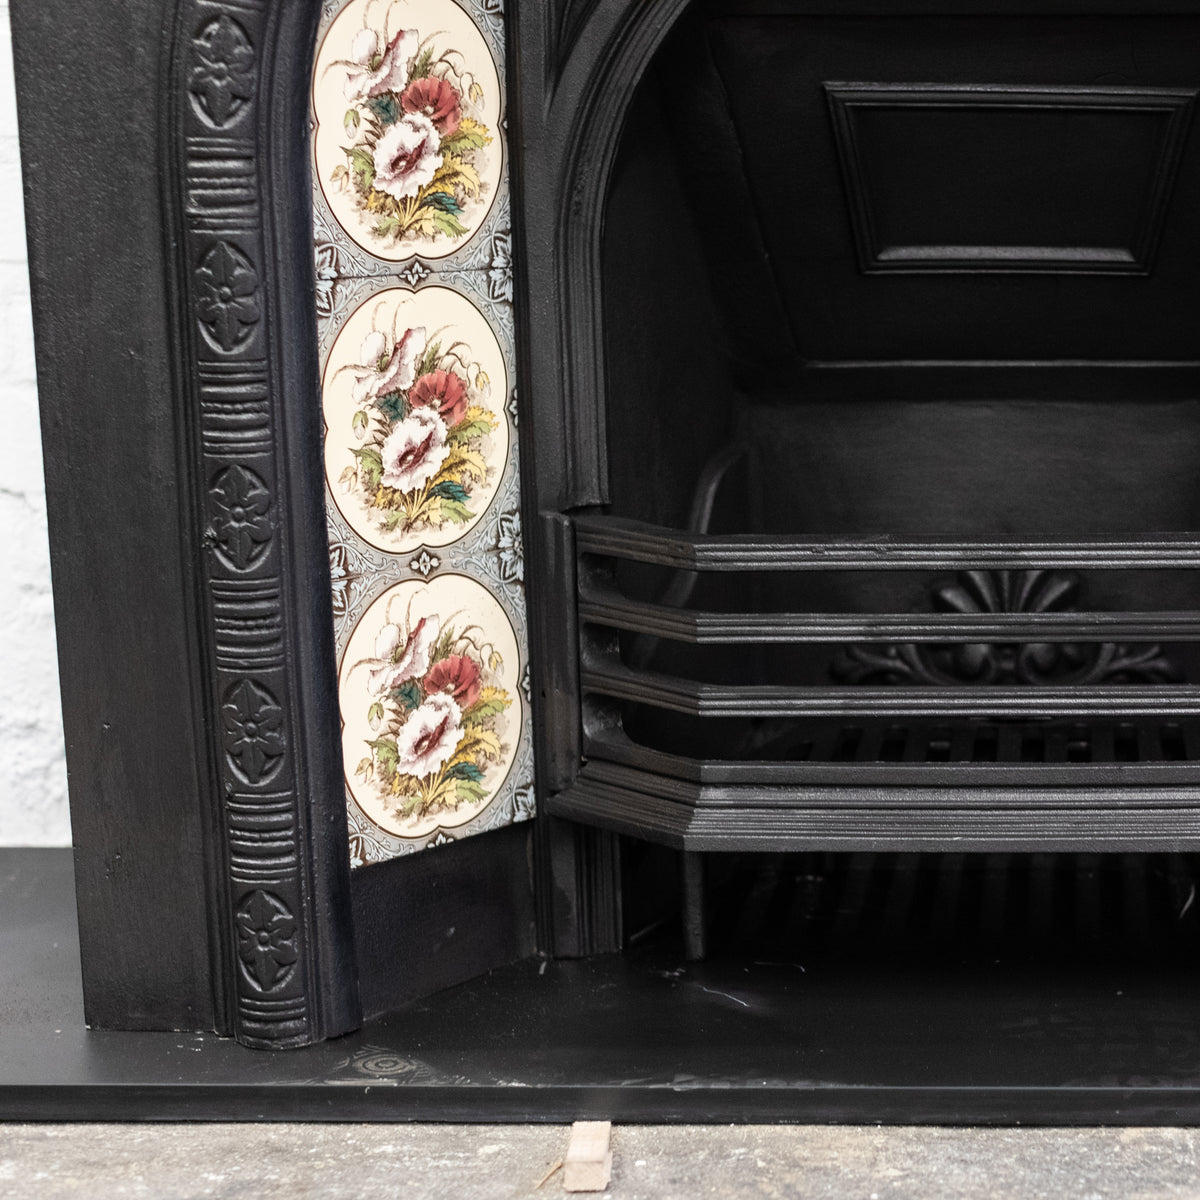 Antique Victorian Arch Tiled Fireplace Insert | The Architectural Forum